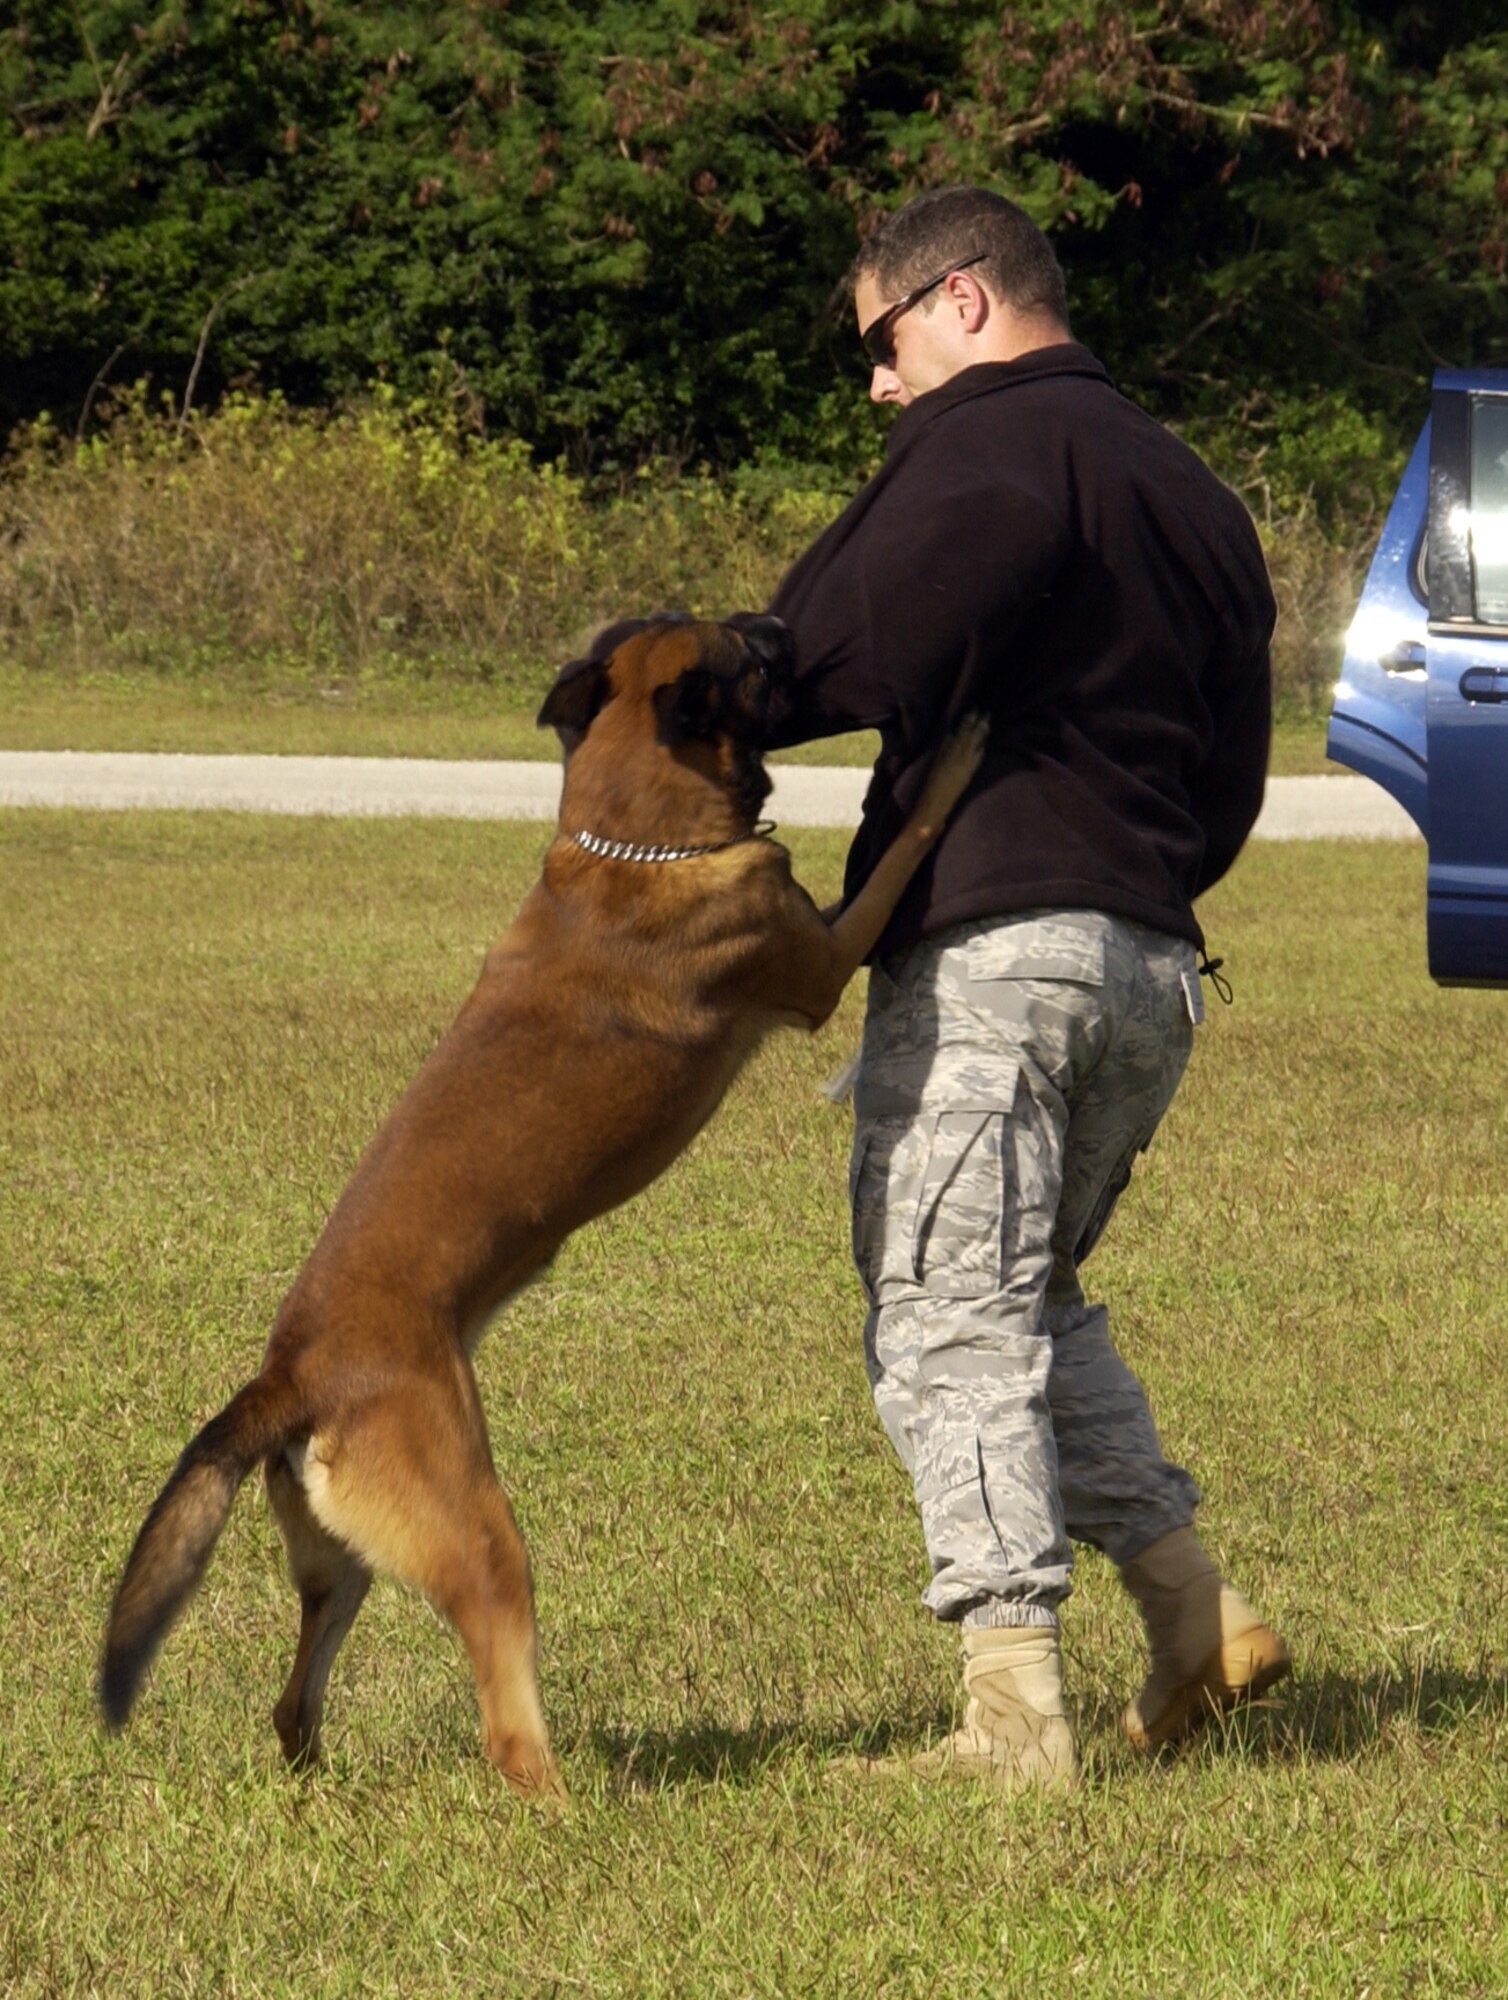 ANDERSEN AIR FORCE BASE, Guam -- Military working dog, "Baby" Carlos stops Staff Sgt. William Townsend, a 36th Security Forces Squadron dog handler acting as a perpetrator, after the suspect becomes uncooperative during a high-risk traffic stop scenario in a MWD competition here Feb. 2. The competition was first time “Baby” Carlos, a newcomer to Andersen, performed before an audience. (U.S. Air Force photo by Airman 1st Class Carissa Wolff)